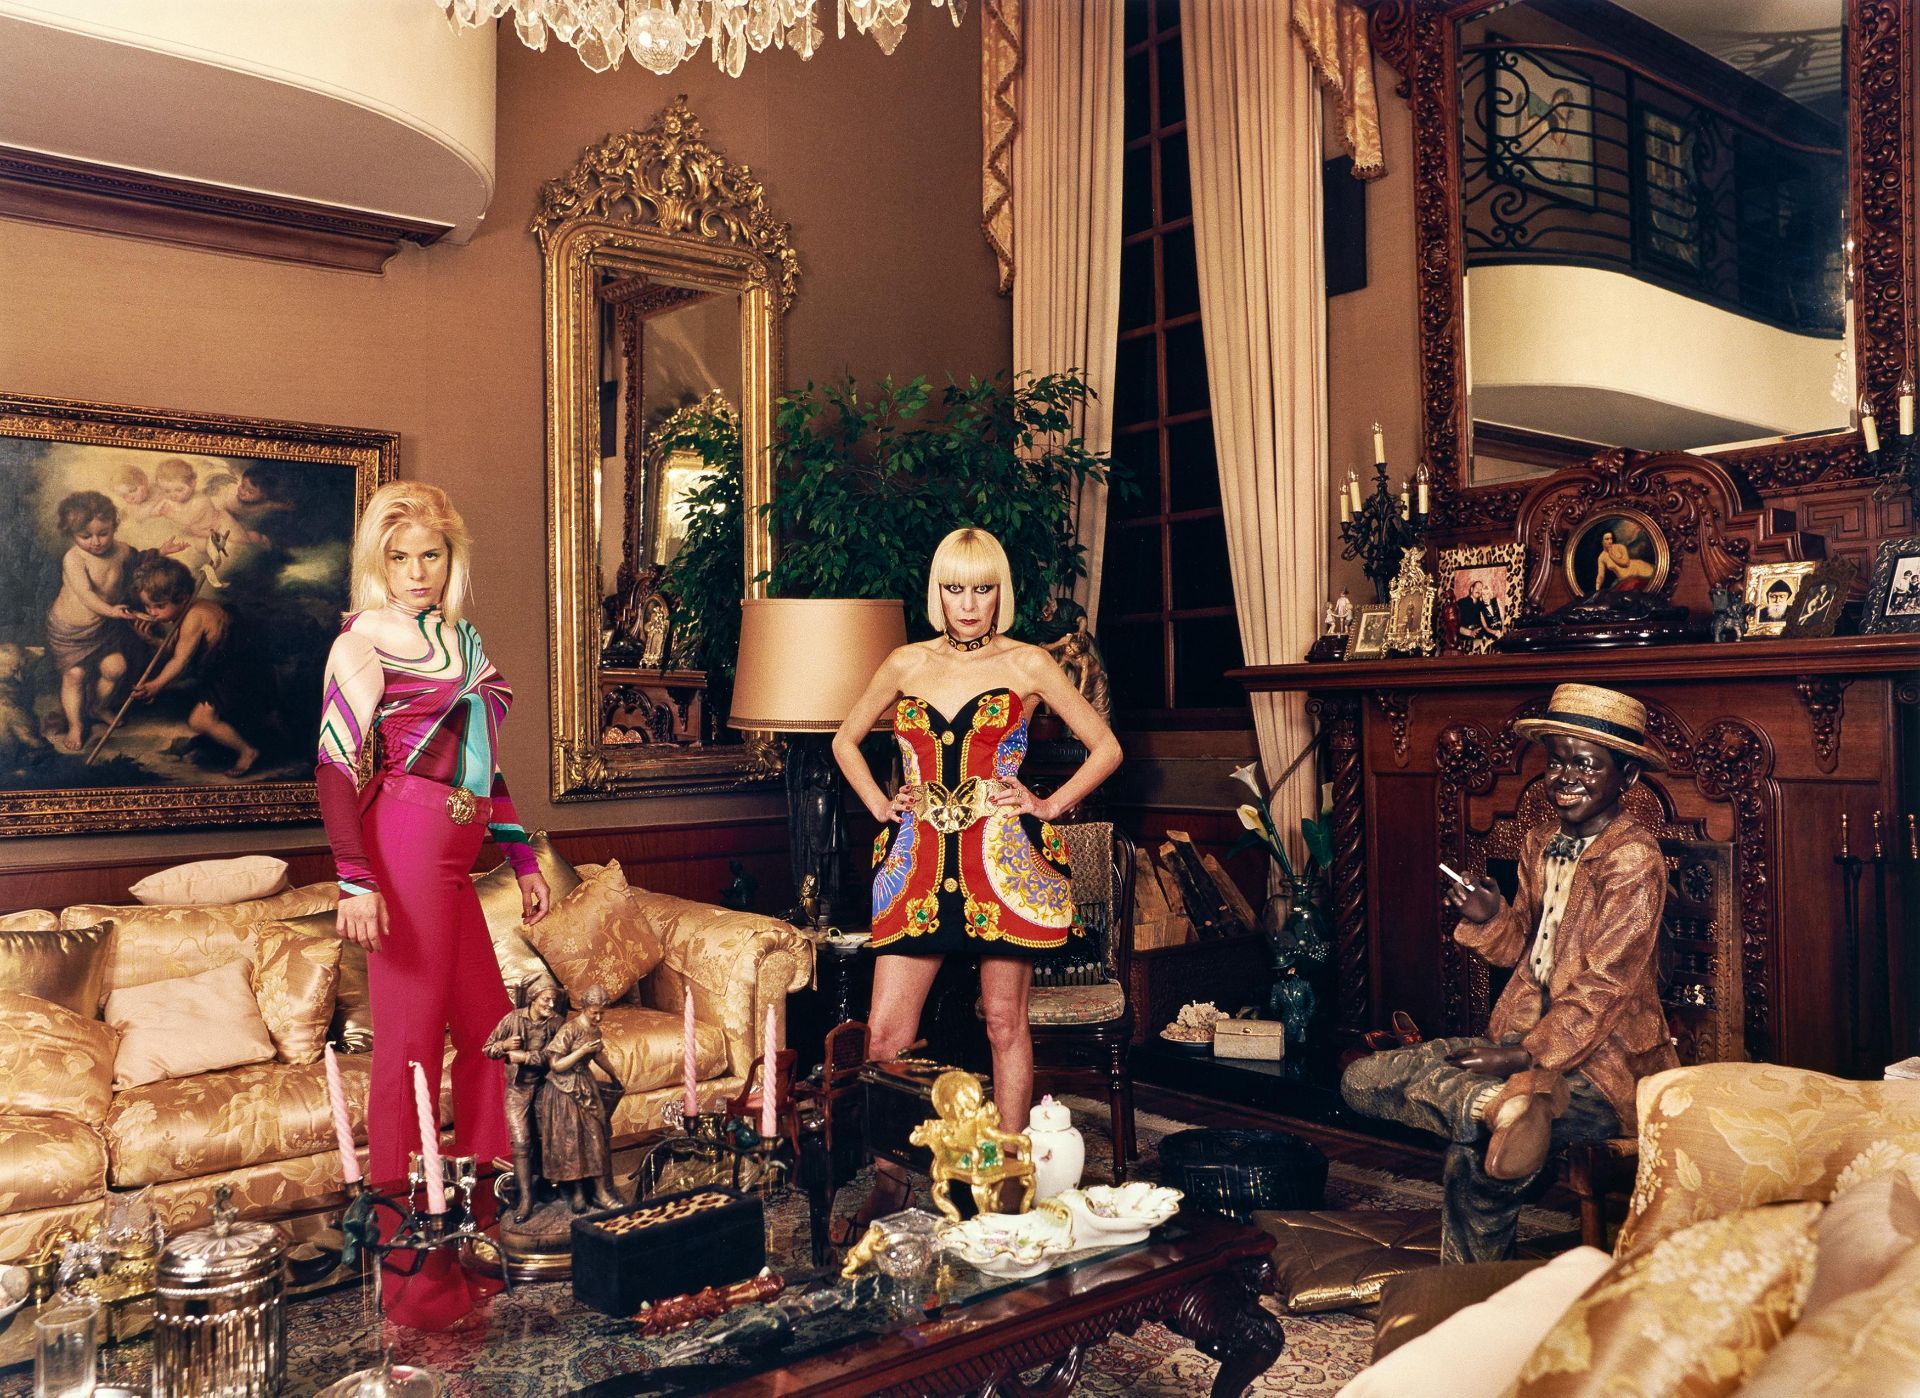 Daniela Rossell: Untitled (Inge and her mother Emma in living room, Mexico City)